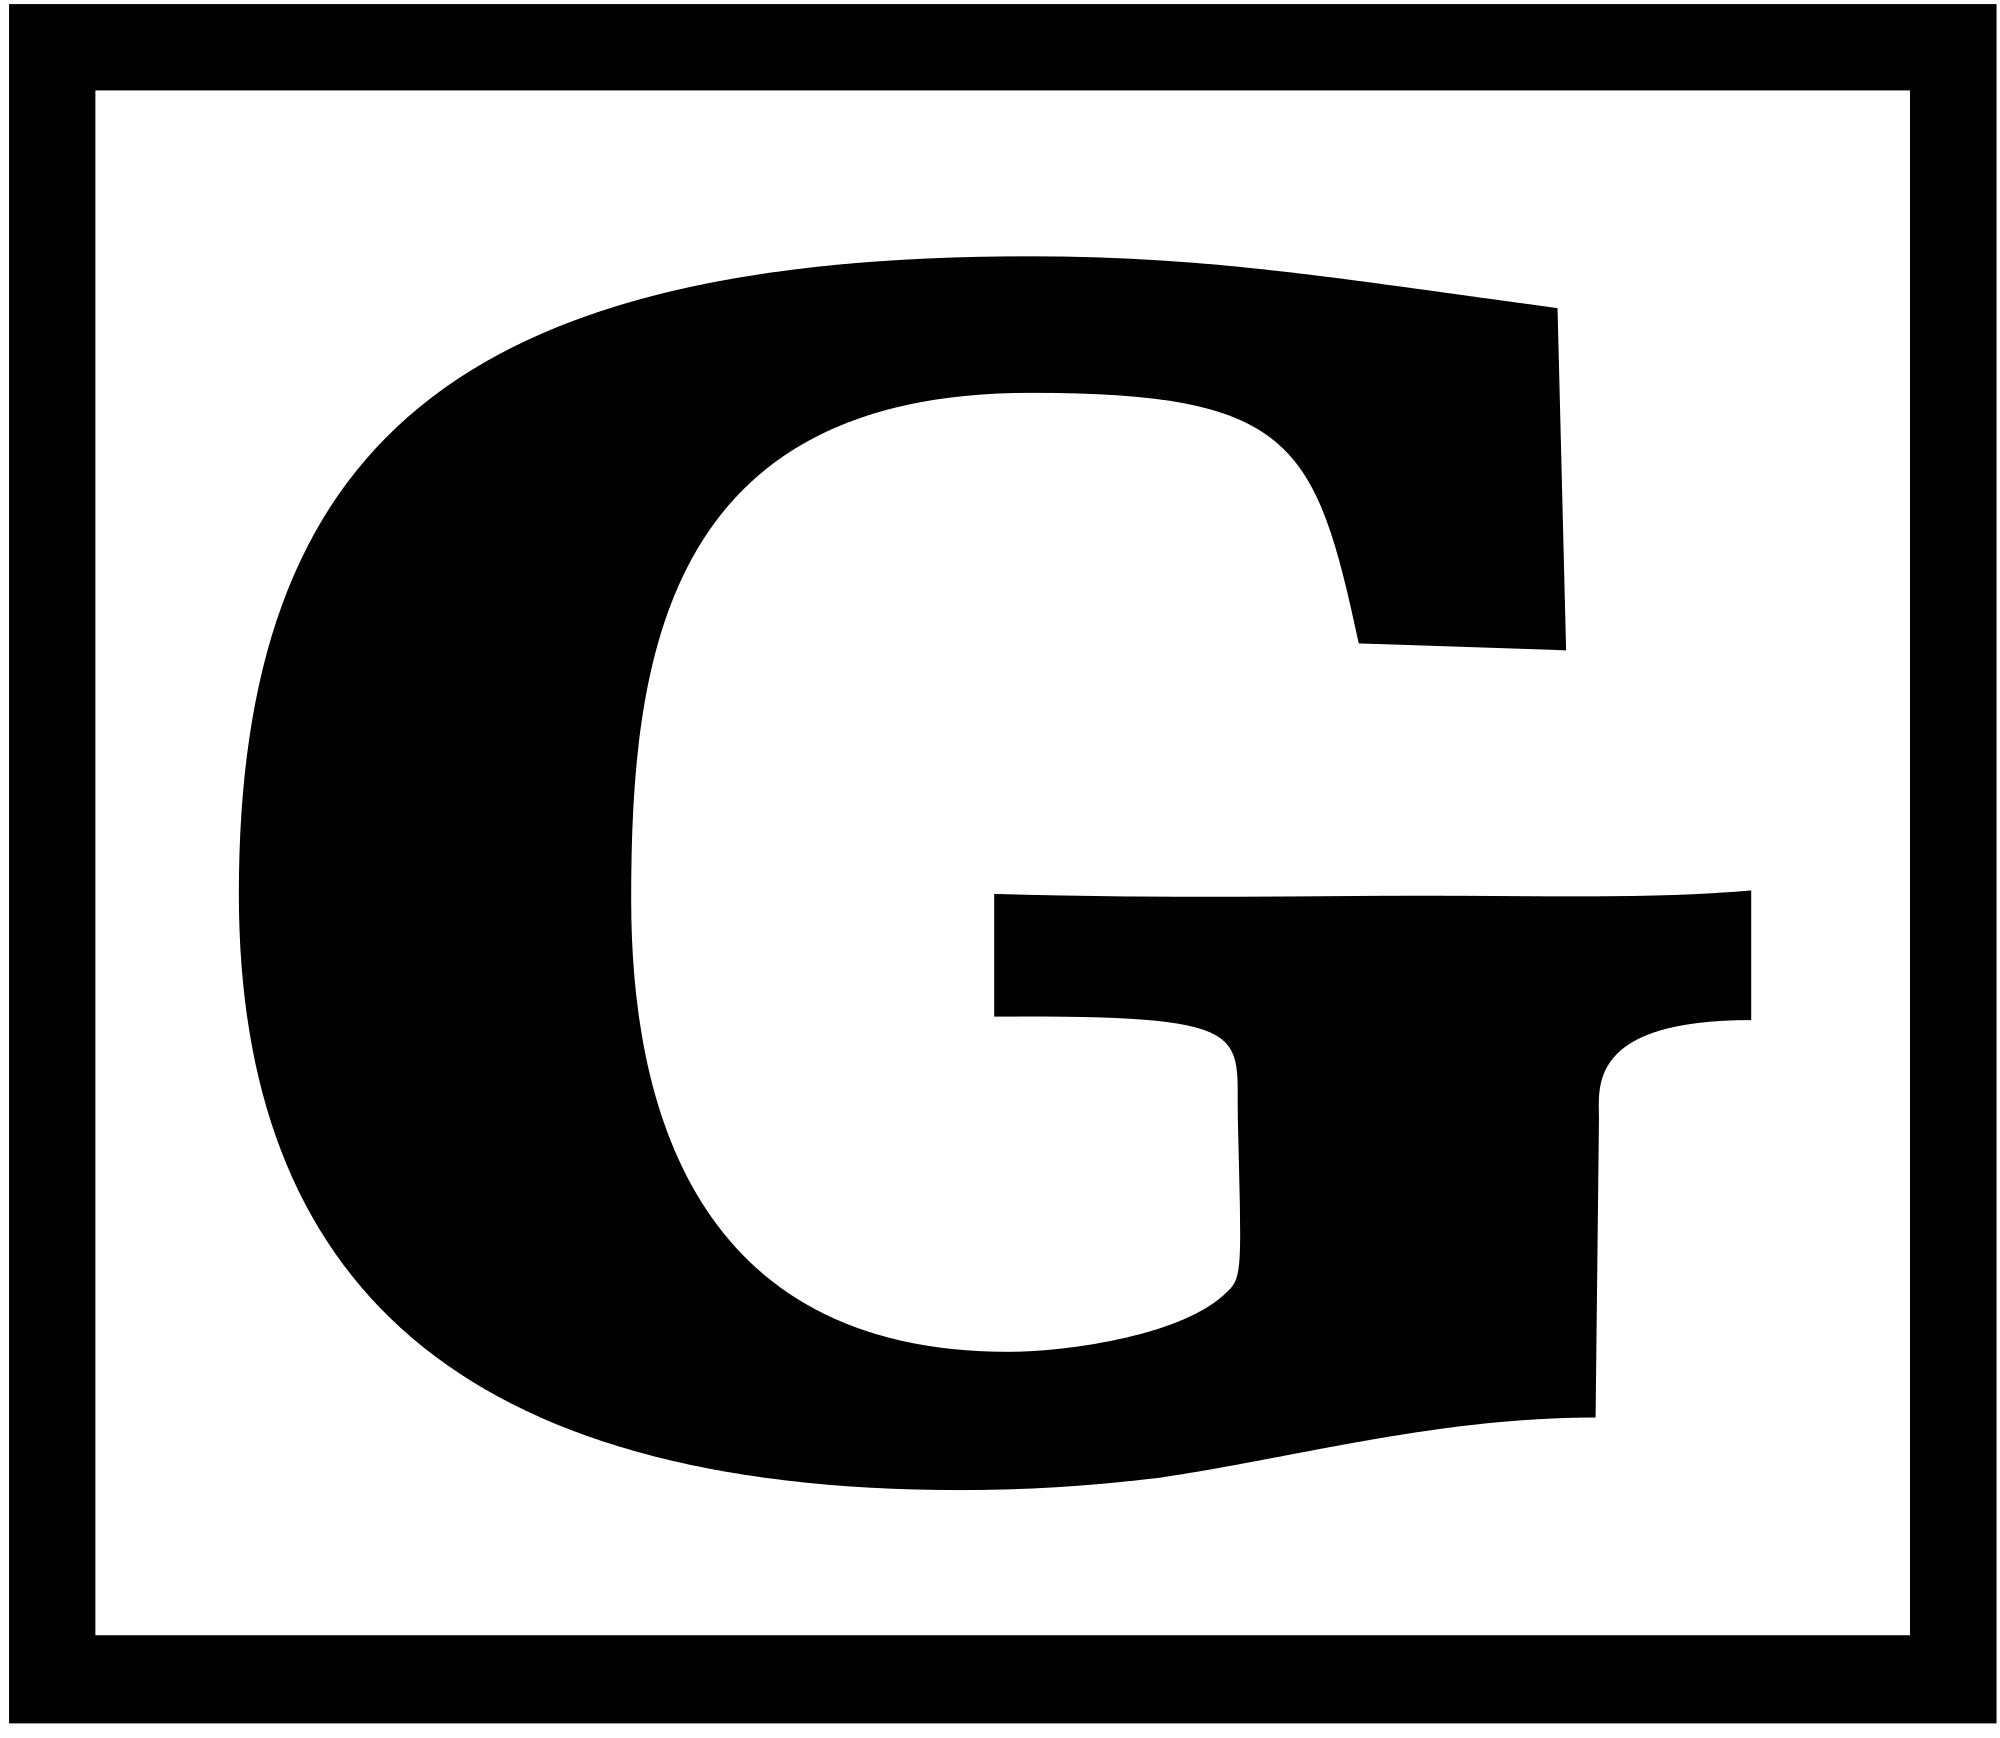 Rating Box Logo - File:RATED G.svg - Wikimedia Commons